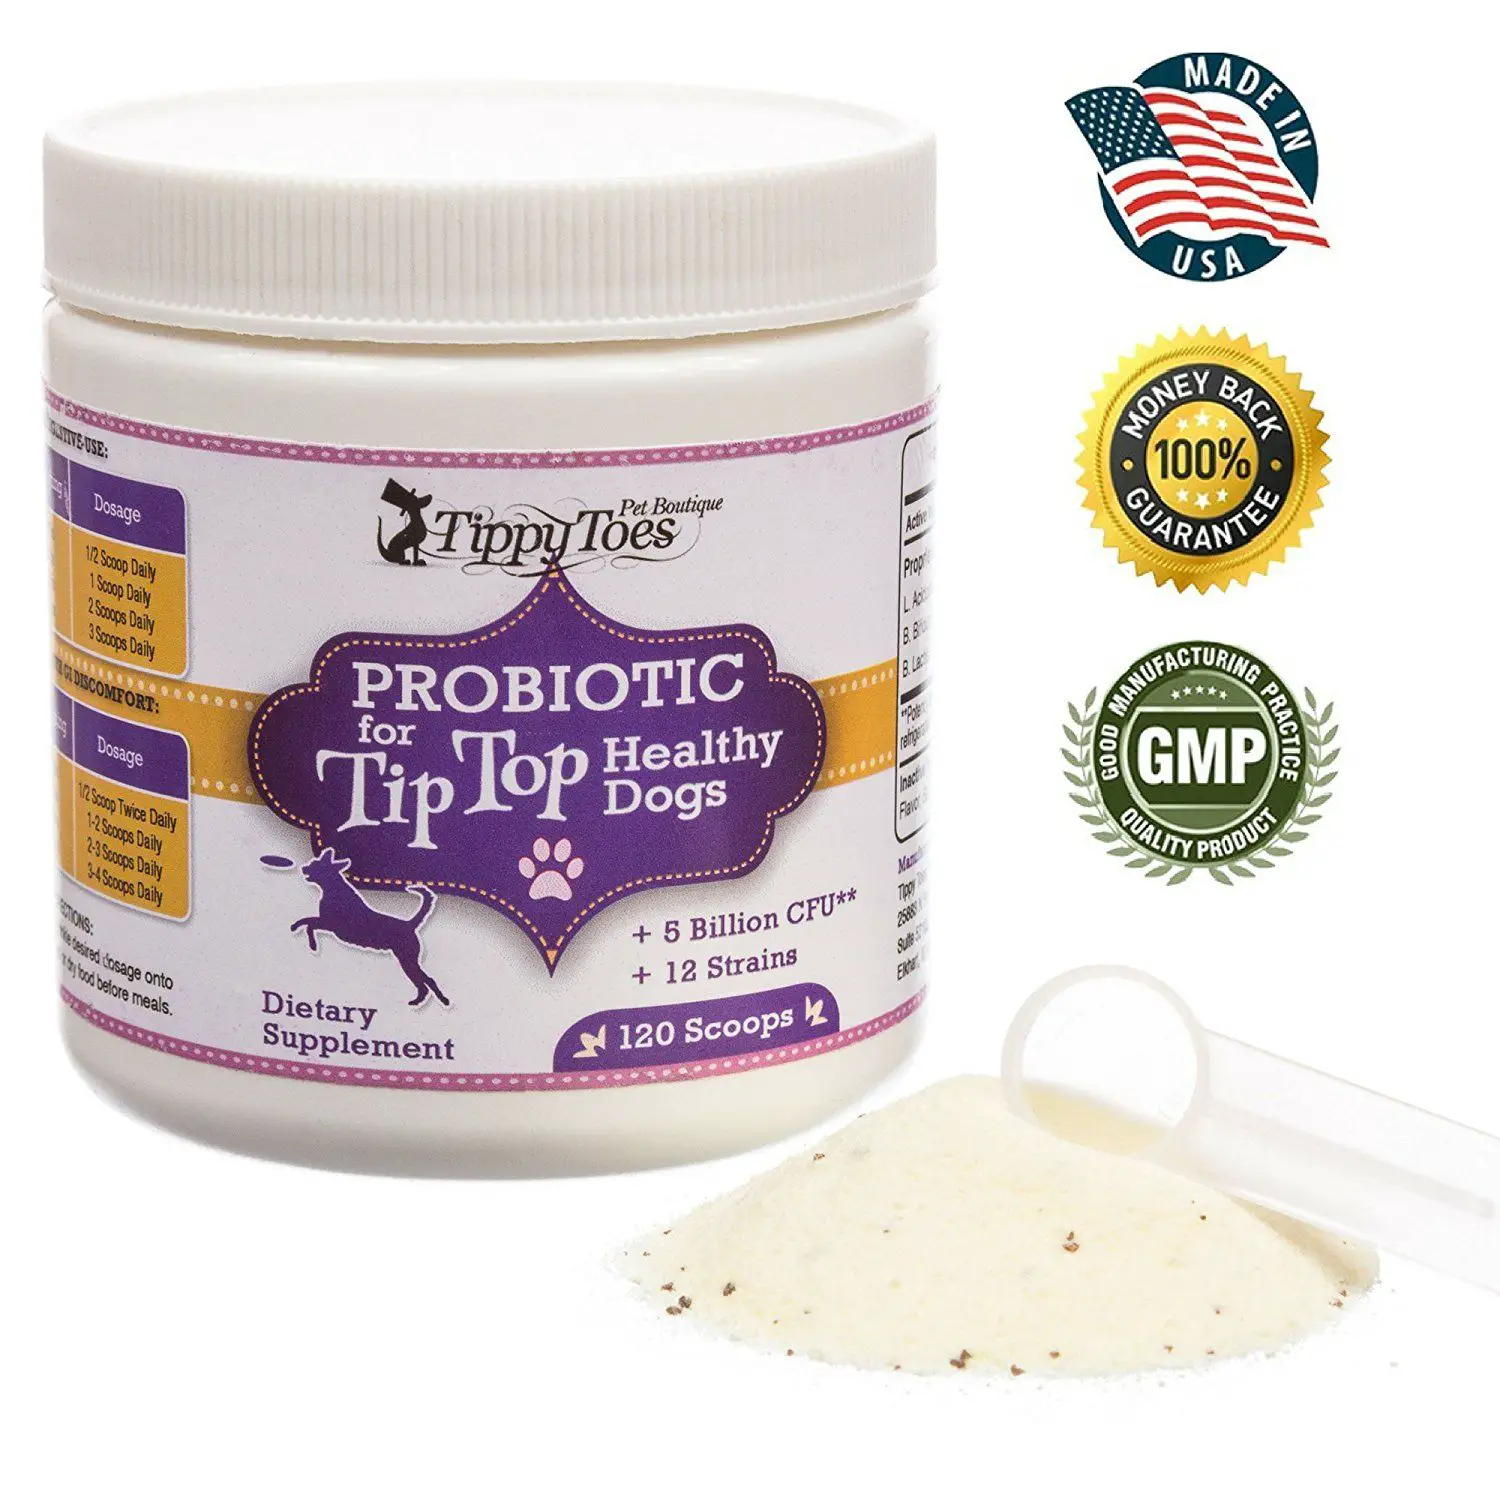 PROBIOTICS FOR DOGS POWDER Relieves Dog Diarrhea Bad Breath Improves ...